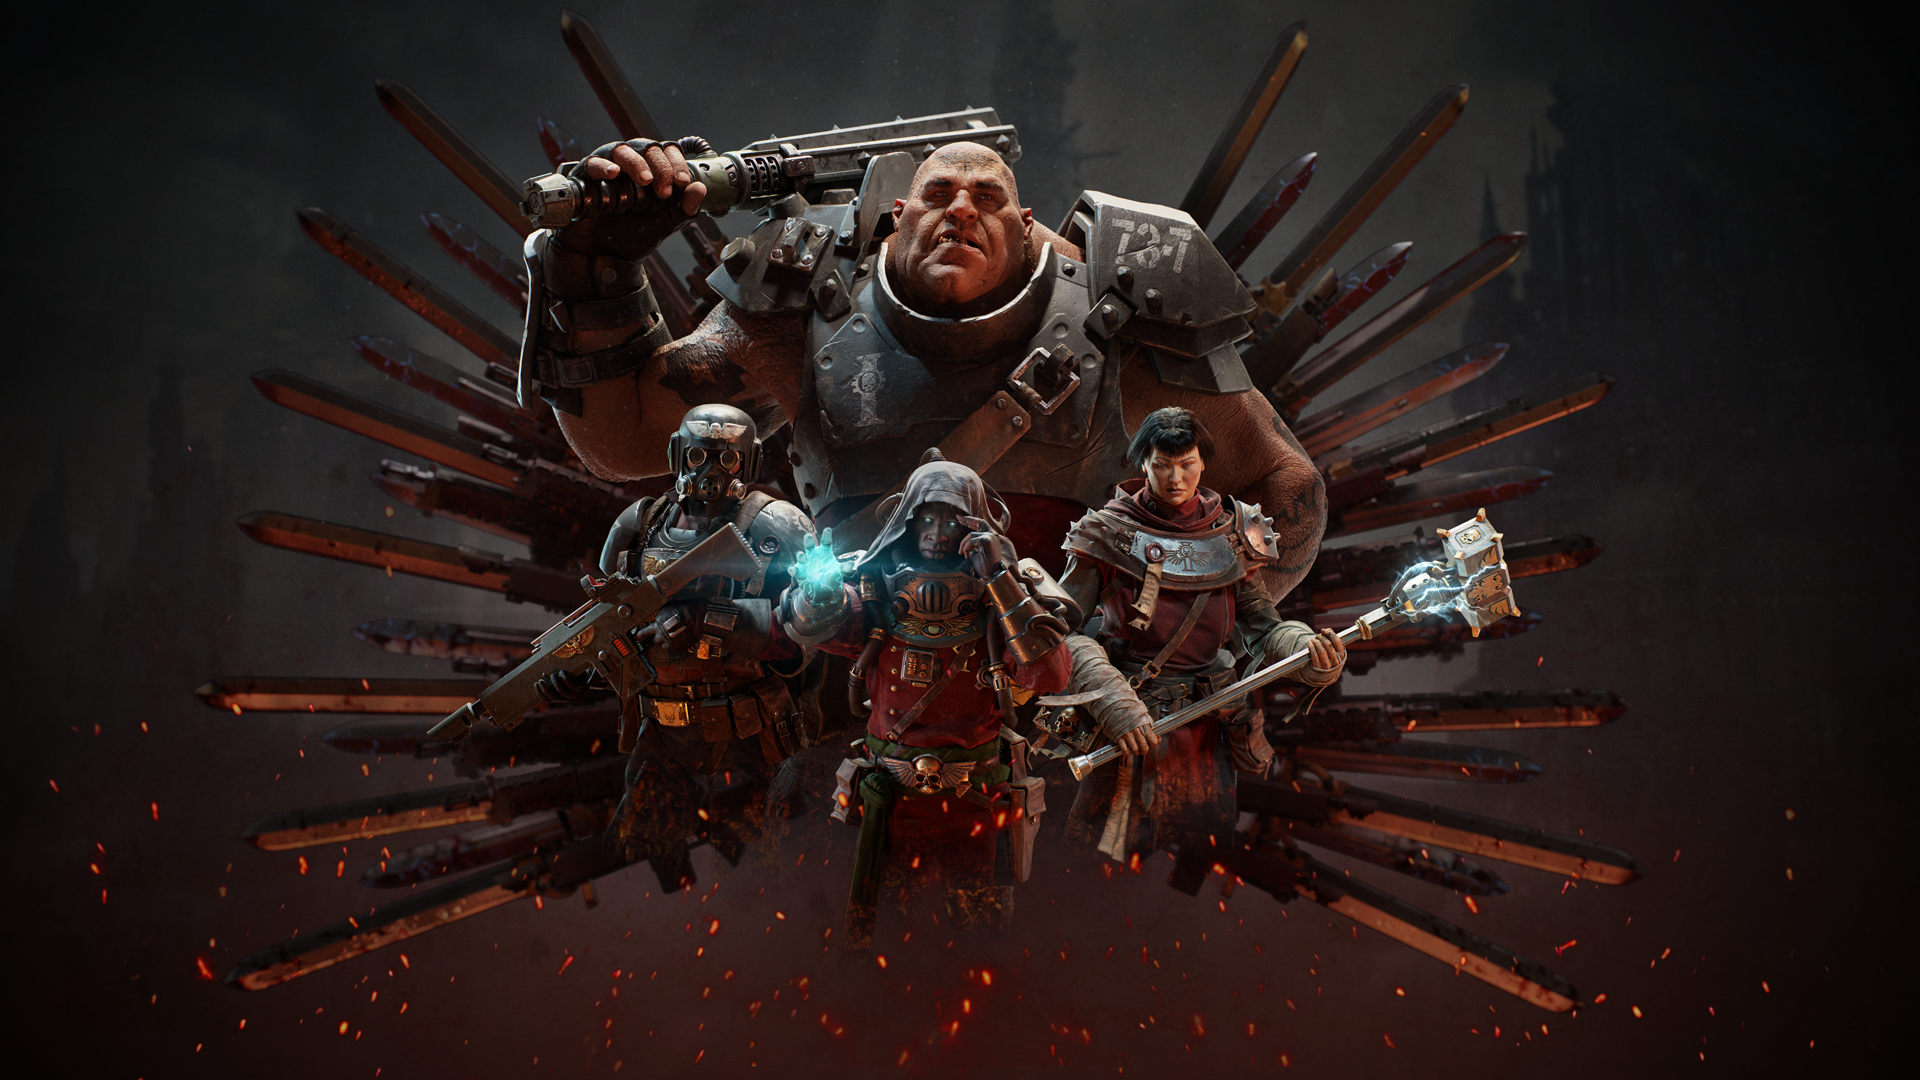 Warhammer 40K: Darktide key art, showing four heroes — an ogryn, two Imperial soldiers, and a psyker